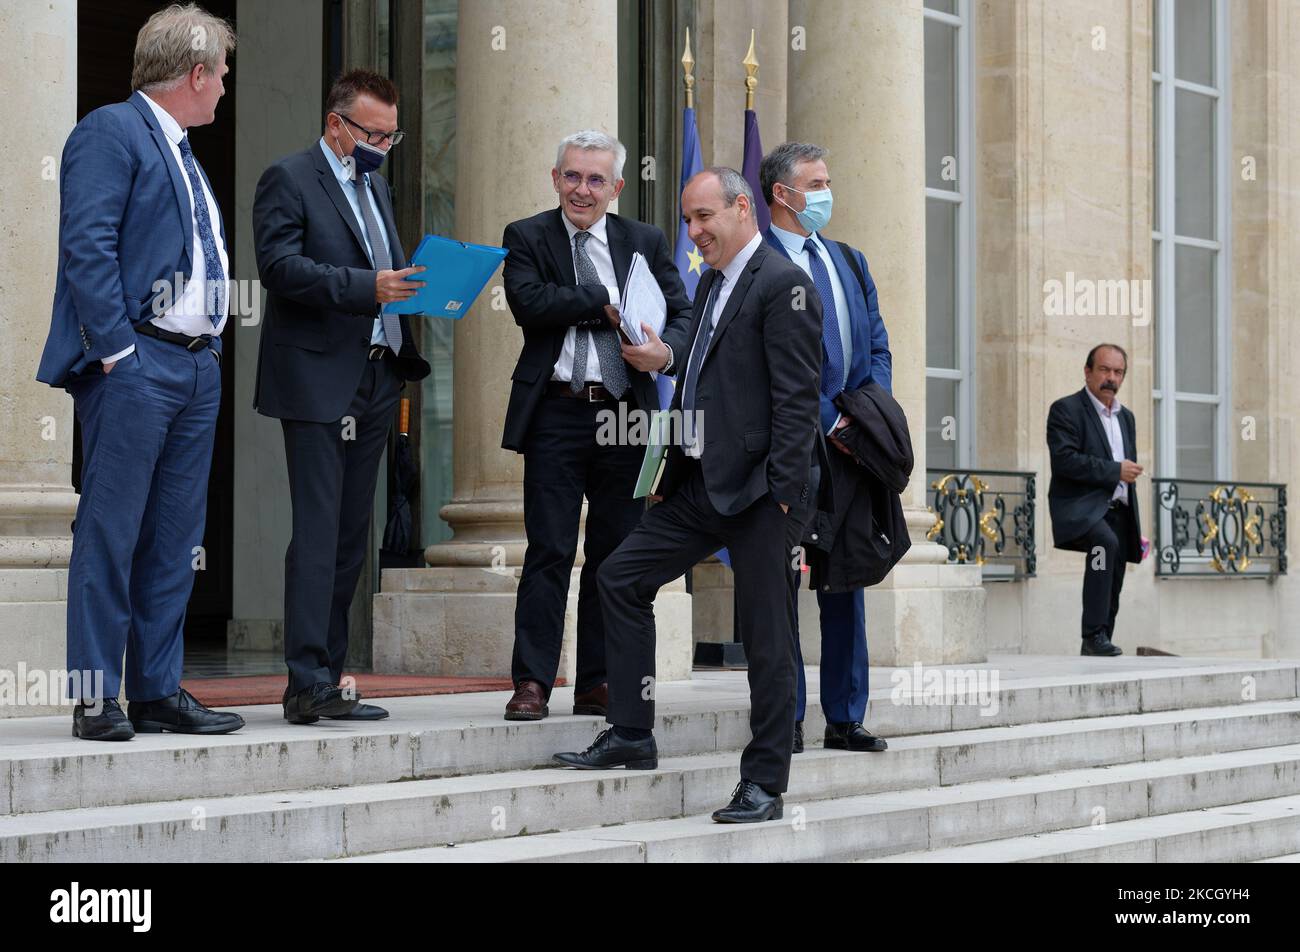 French CFE-CGC labour union's president Francois Hommeril,French Force Ouvriere (FO) union general secretary Yves Veyrier,French Democratic Confederation of Labour (CFDT) union's general secretary Laurent Berger leaves after a meeting with unions and French President Macron at the Elysee Palace in Paris on July 6, 2021 (Photo by Daniel Pier/NurPhoto) Stock Photo